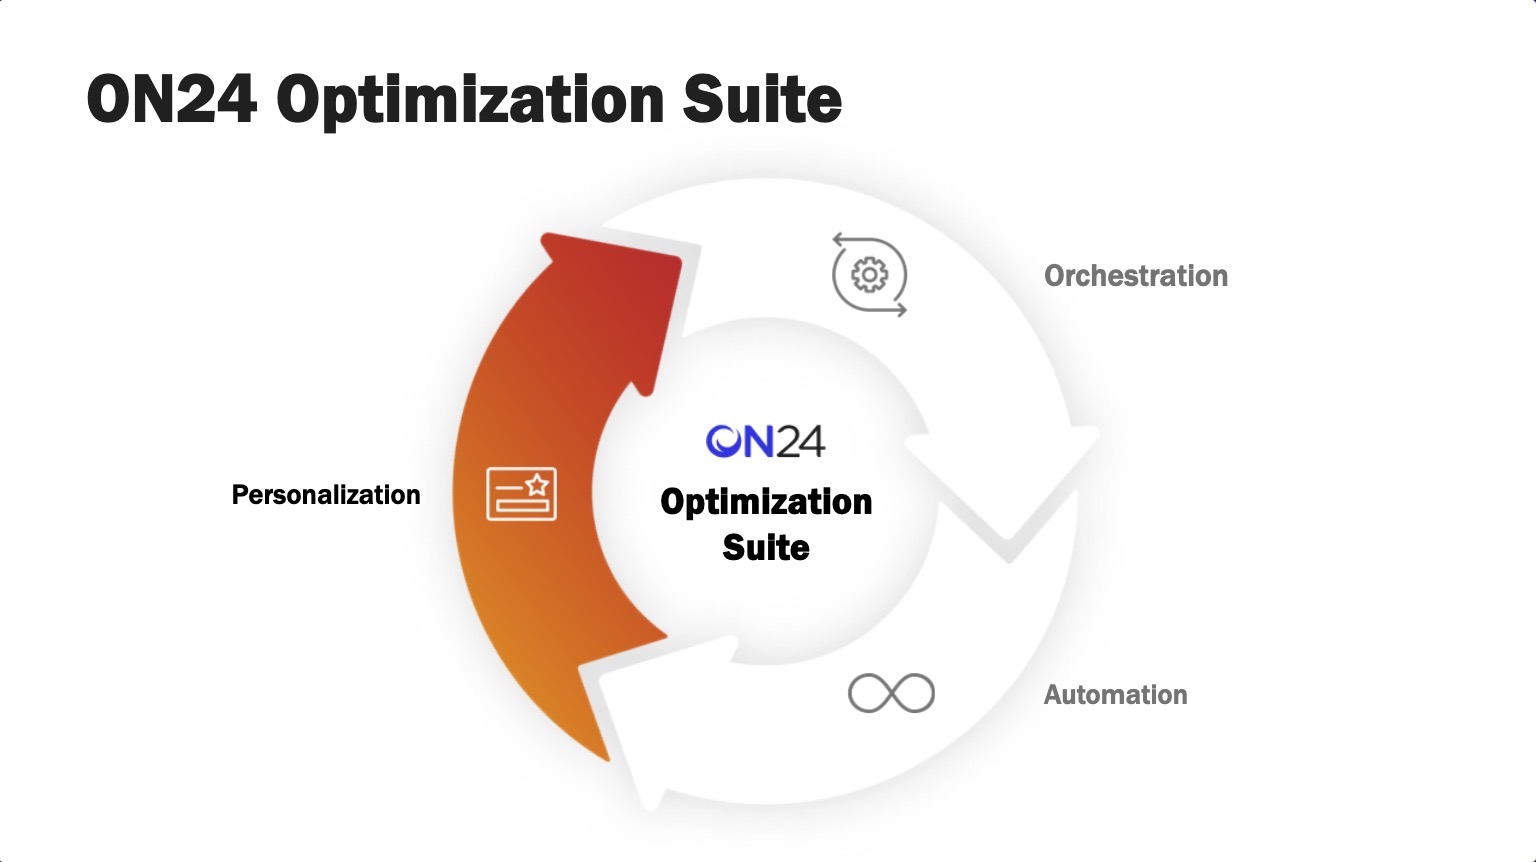 Personalization at ON24X 2023